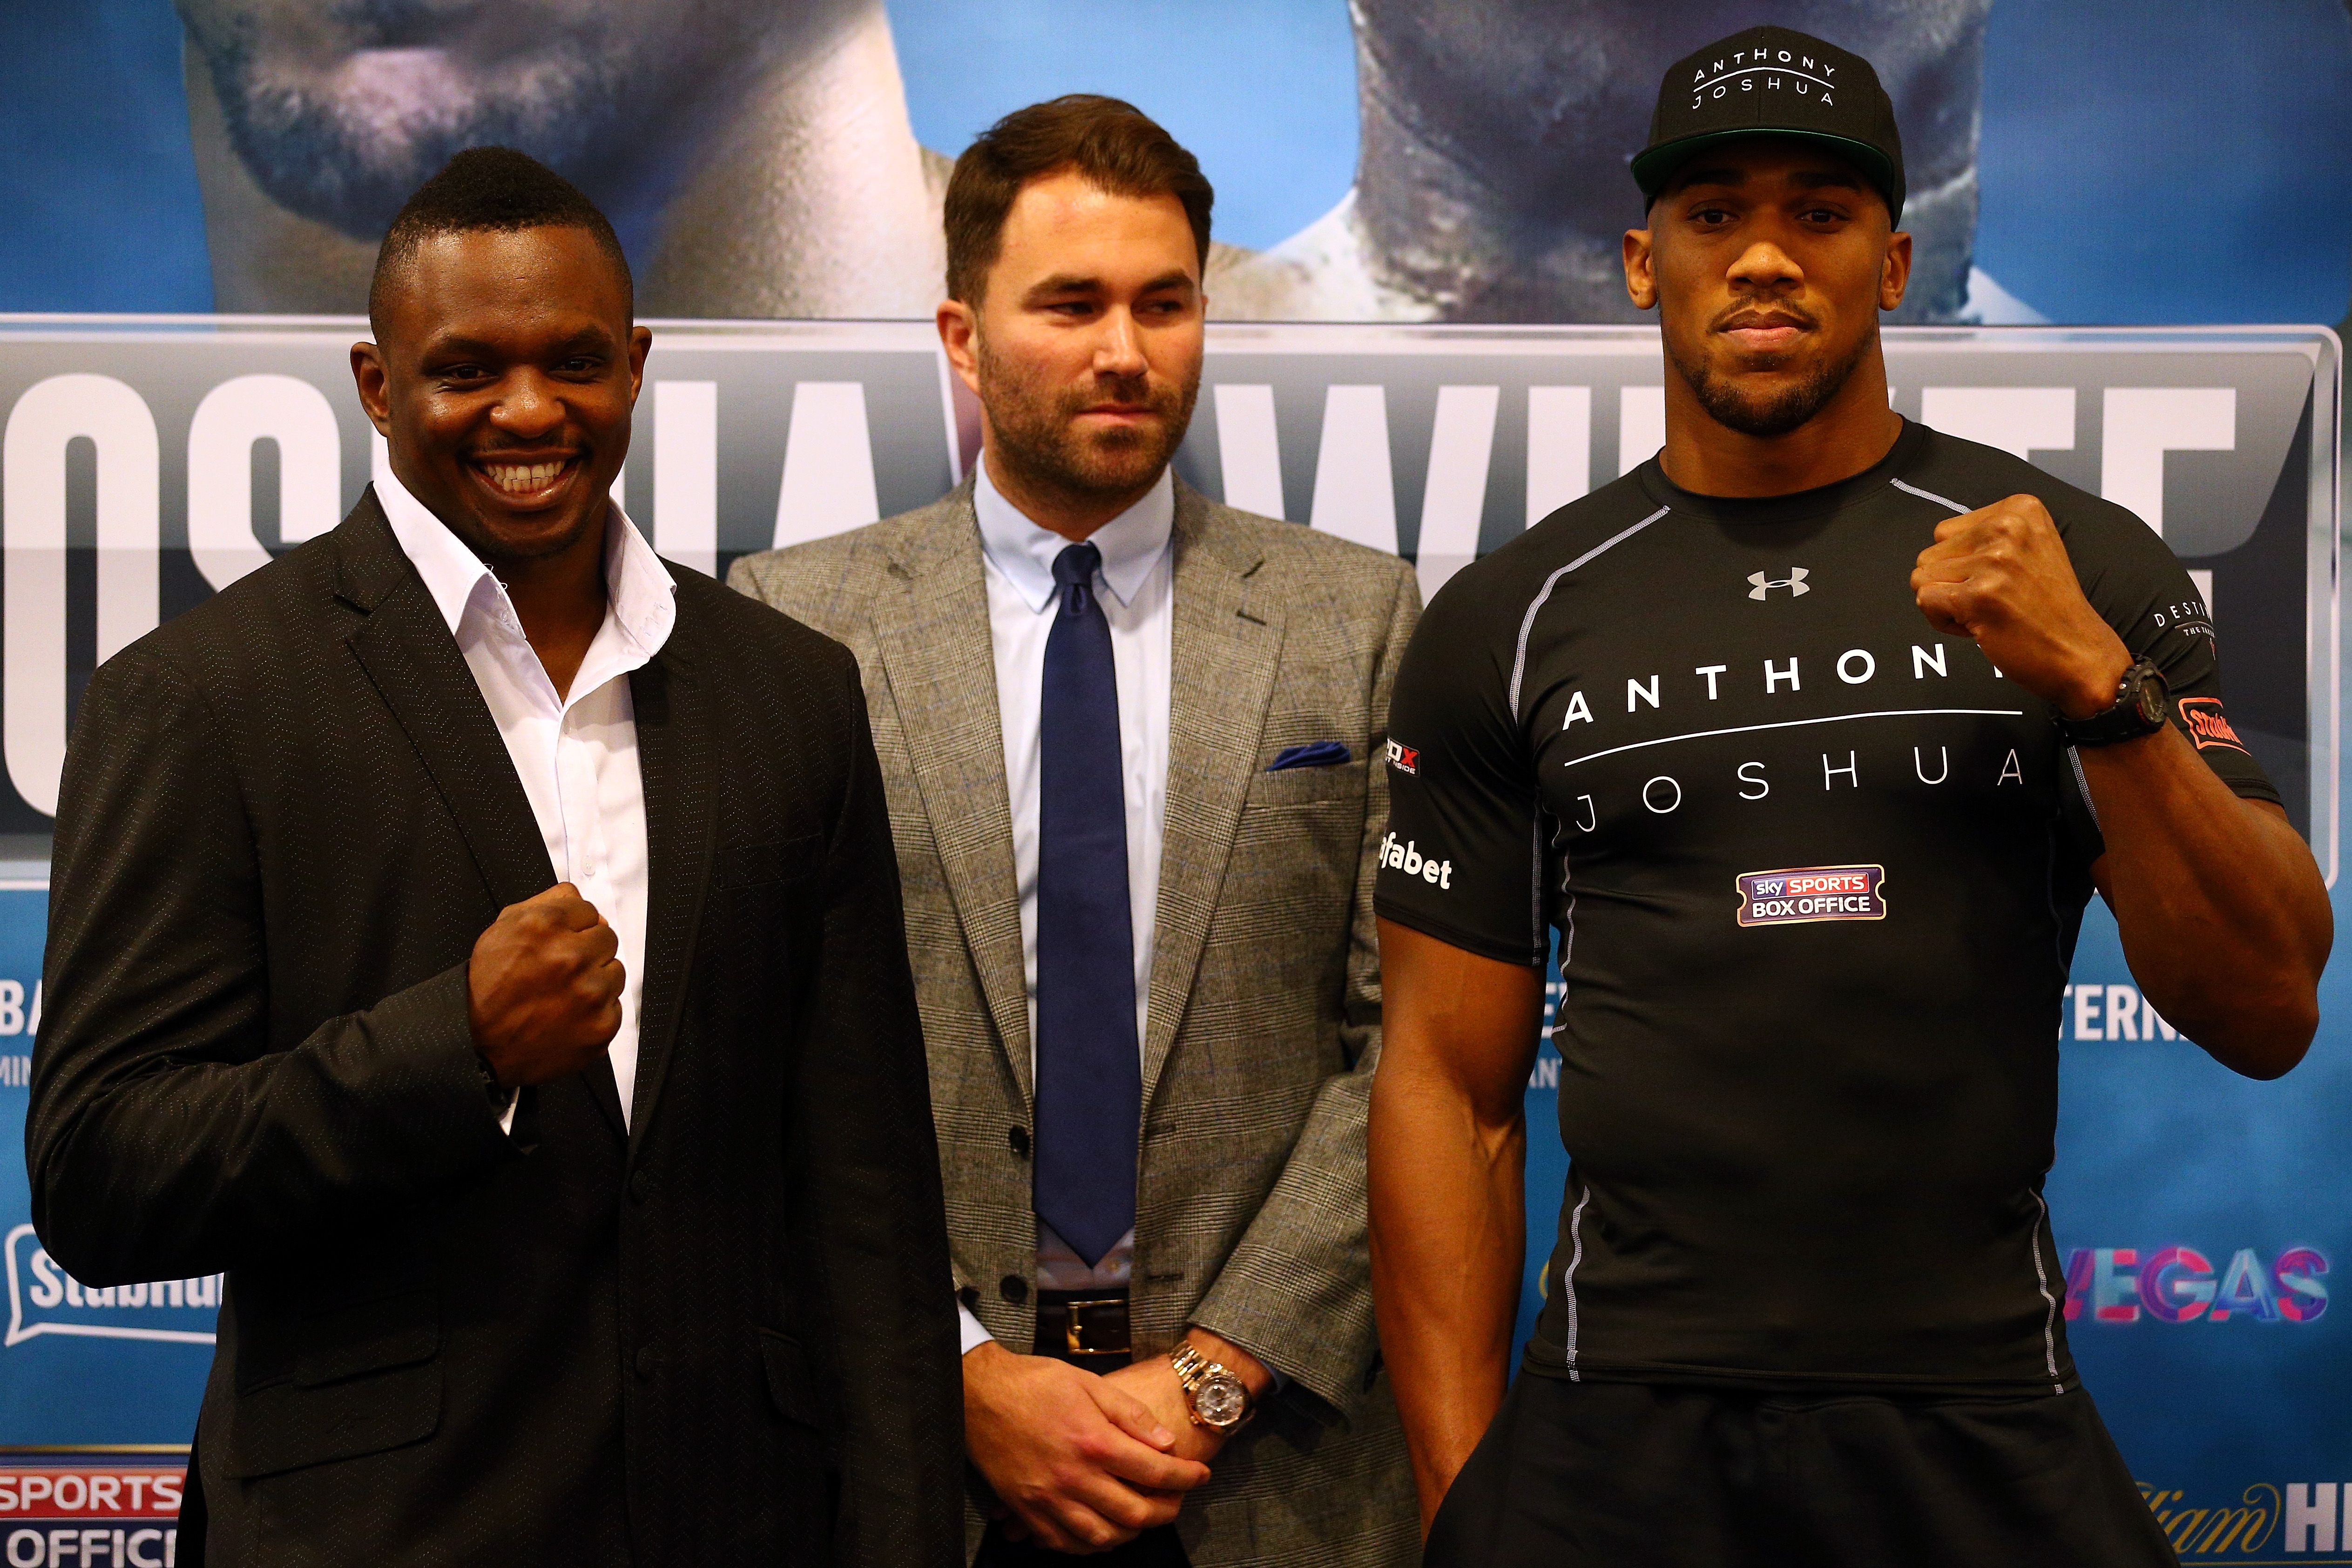 Anthony Joshua and Dillian Whyte could rematch in 2023